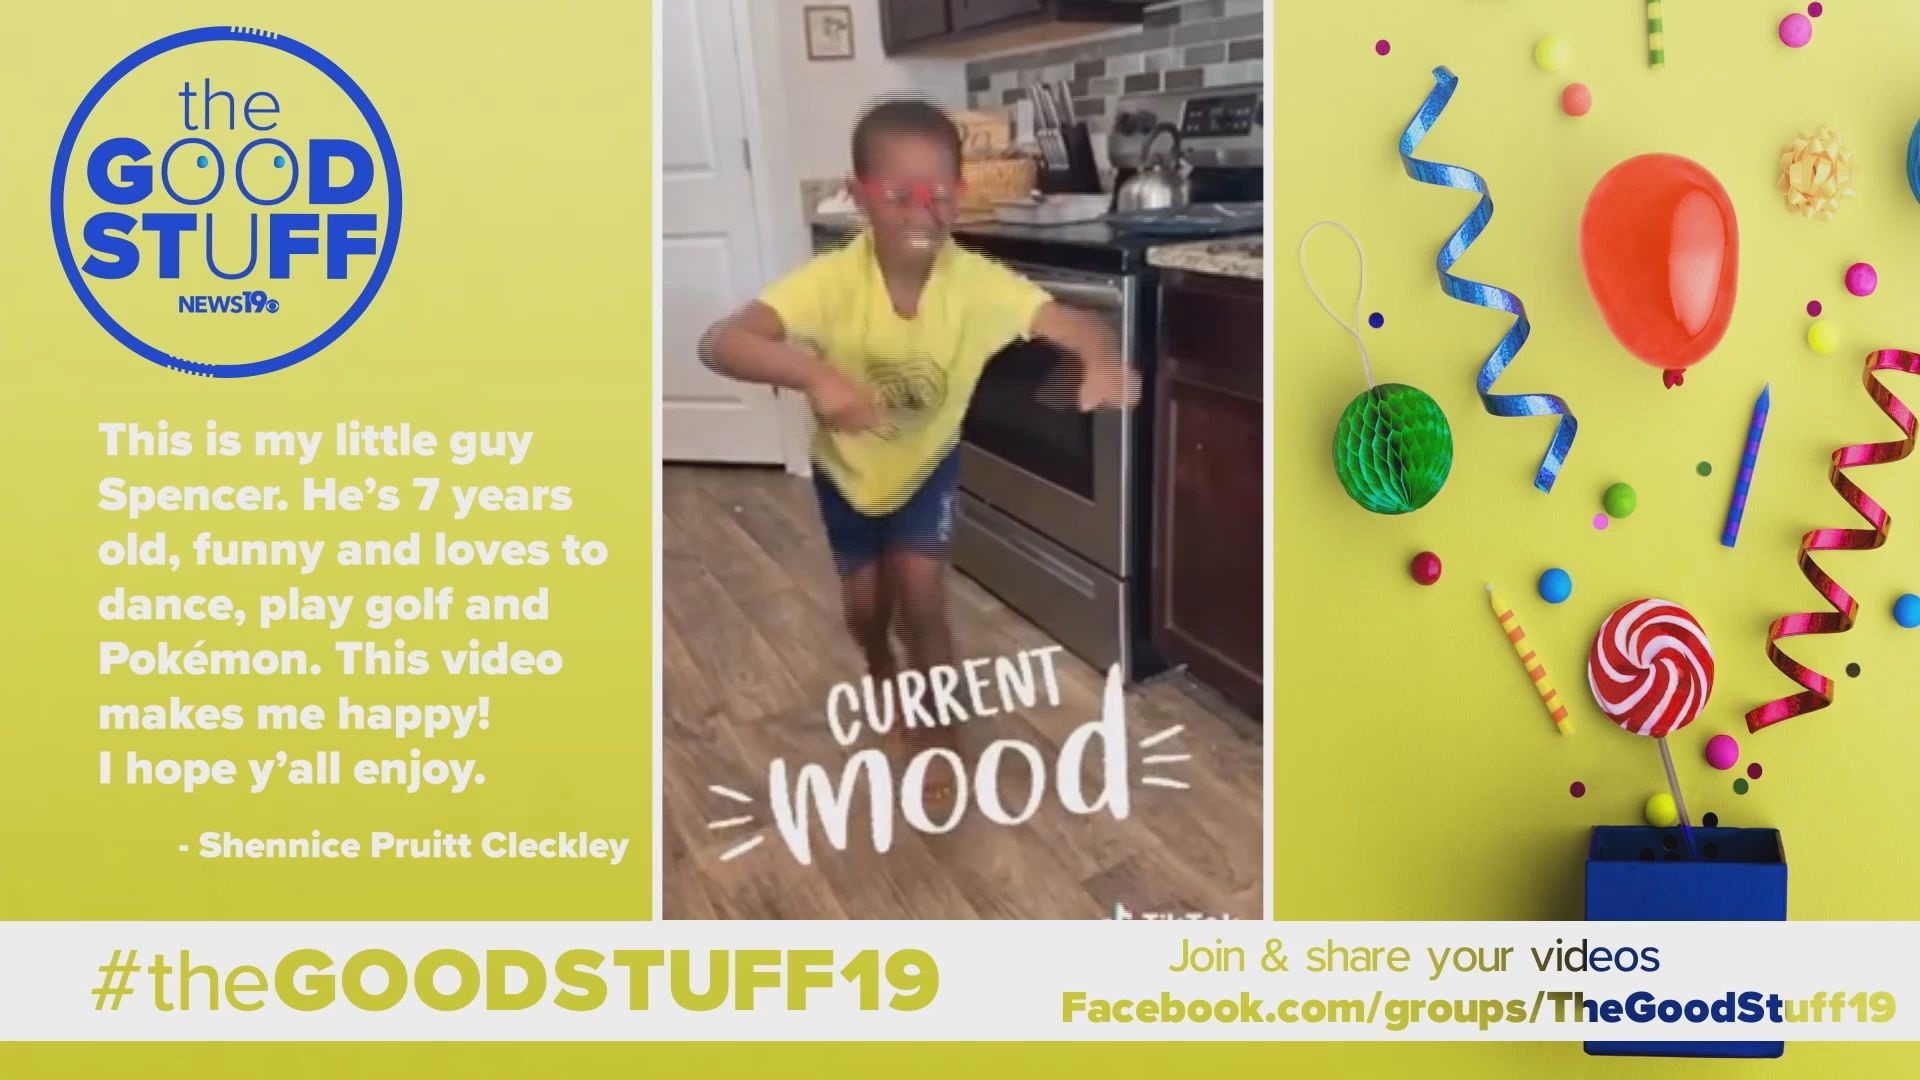 This is my little guy Spencer. He's 7 years old, funny and loves to dance, play golf, and Pokemon. This video makes me happy!